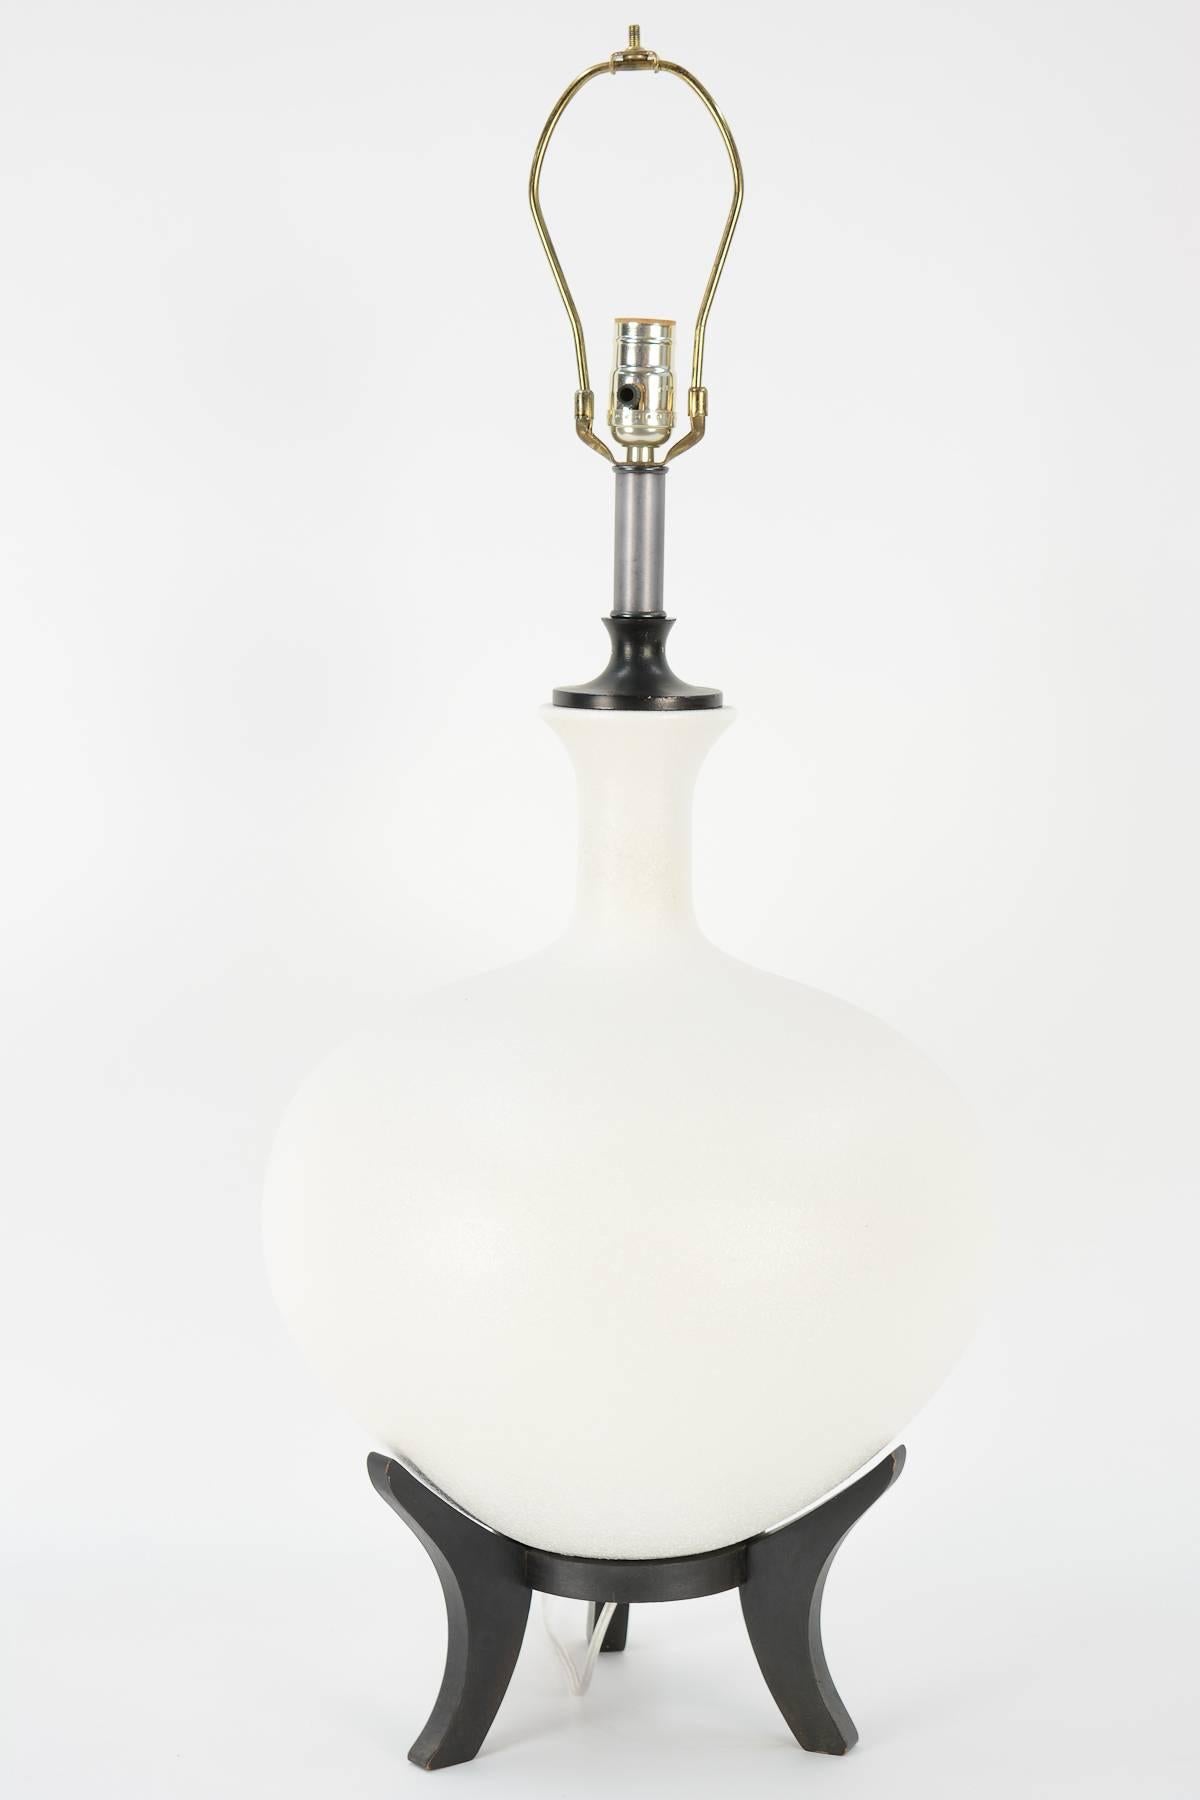 An exquisite pair of textured grand Danish ceramic lamps with floating tripod bases.

Sold without shades.